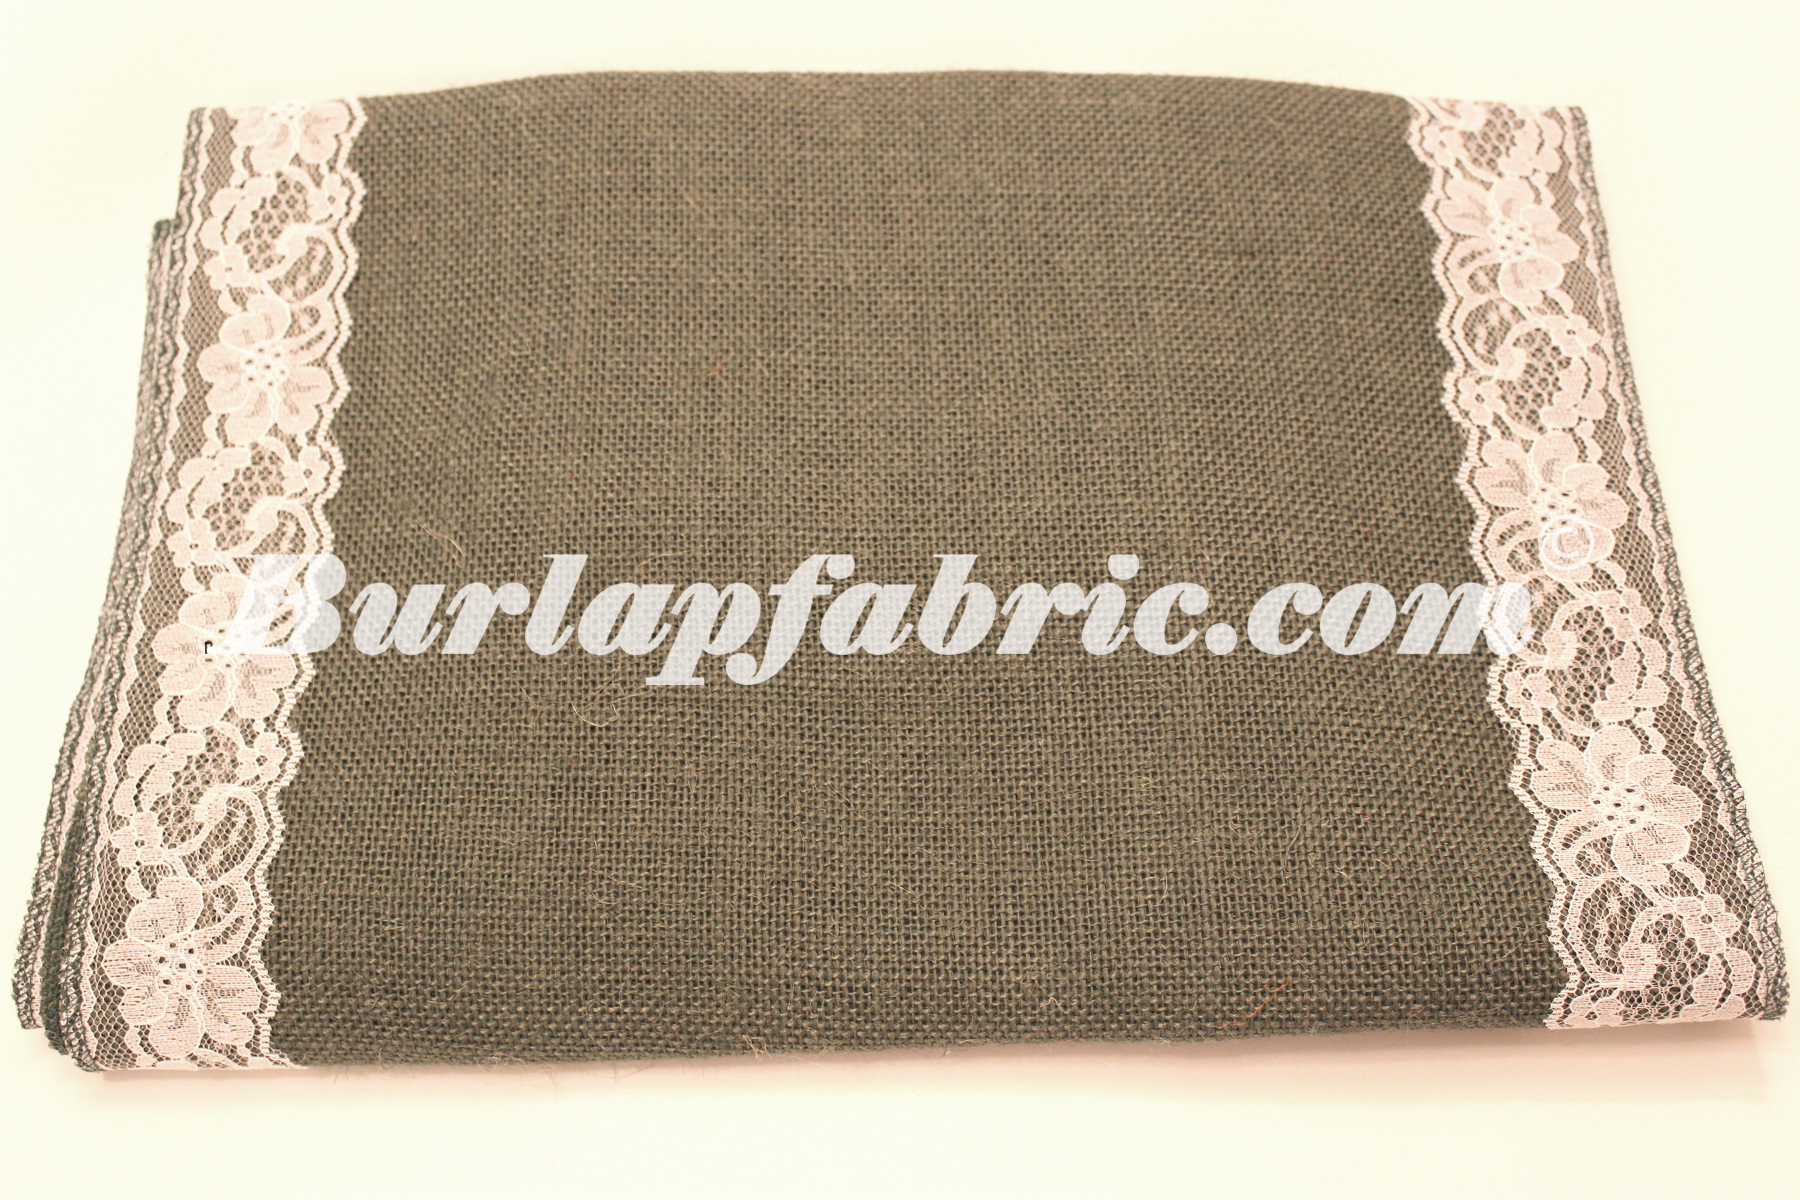 14" Charcoal Grey Burlap Runner with 2" White Lace Borders